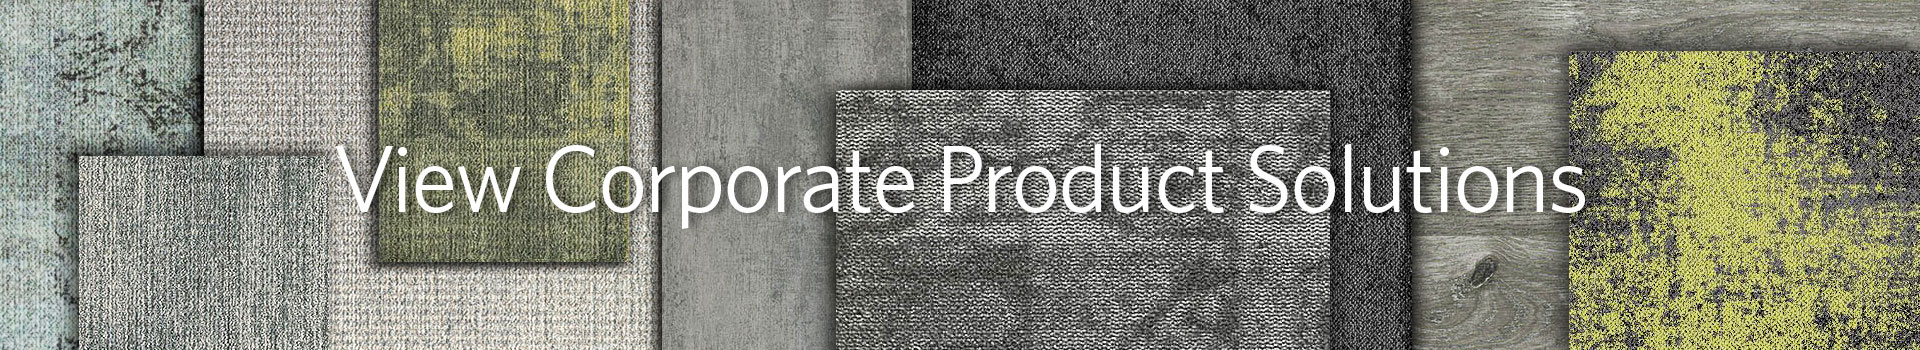 View Corporate Product Soltions